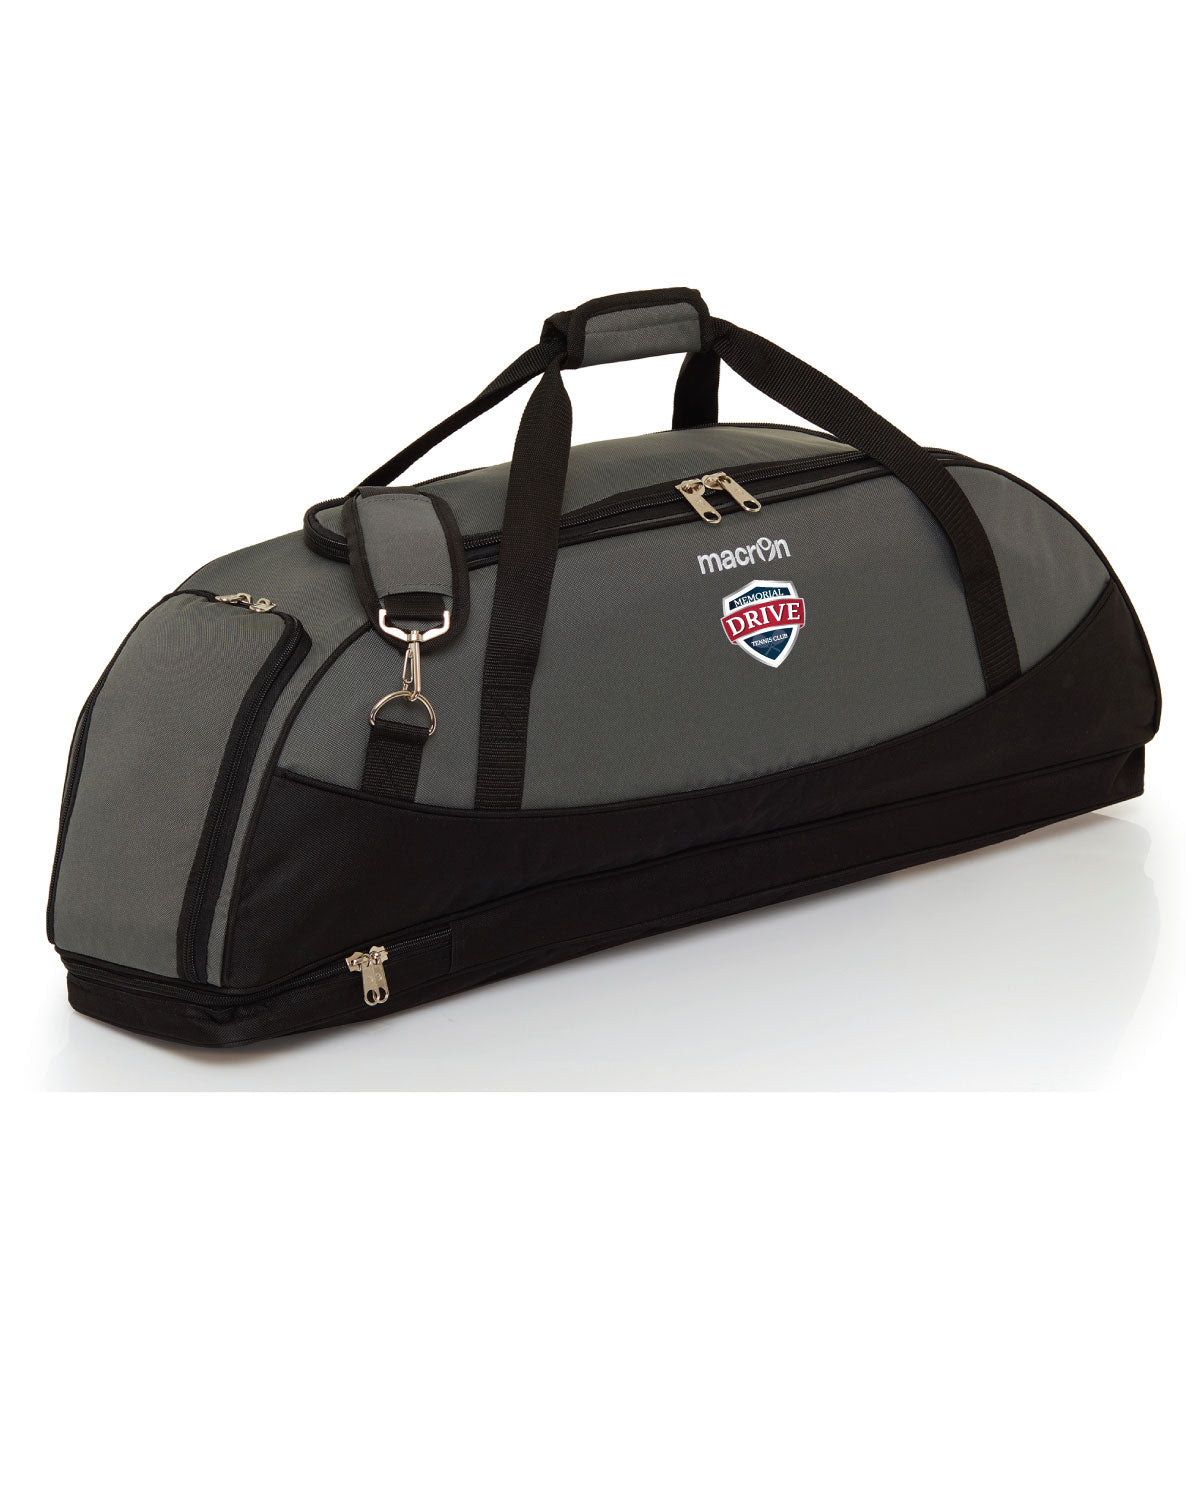 THE DRIVE - TENDER HOLDALL BAG